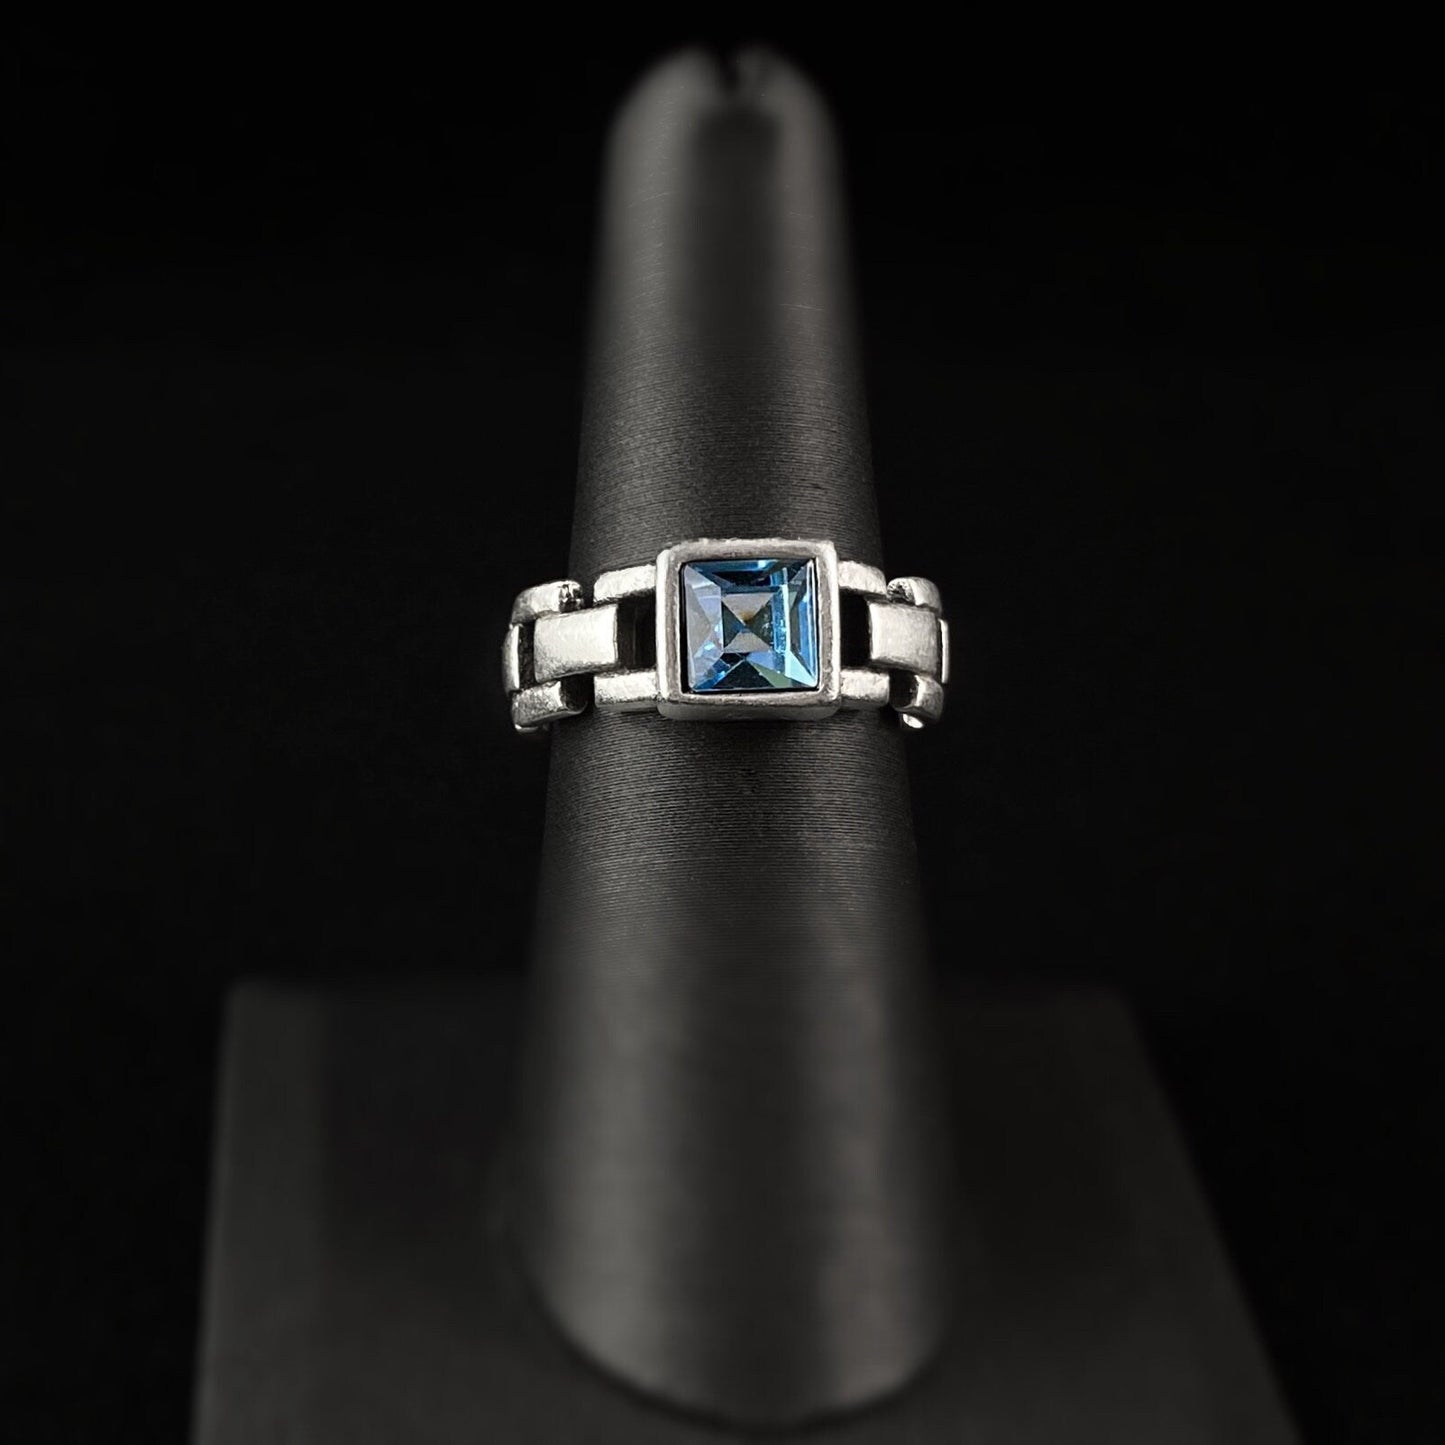 Chunky Link Silver Ring with Sky Blue Crystal, Handmade, Nickel Free - Noir